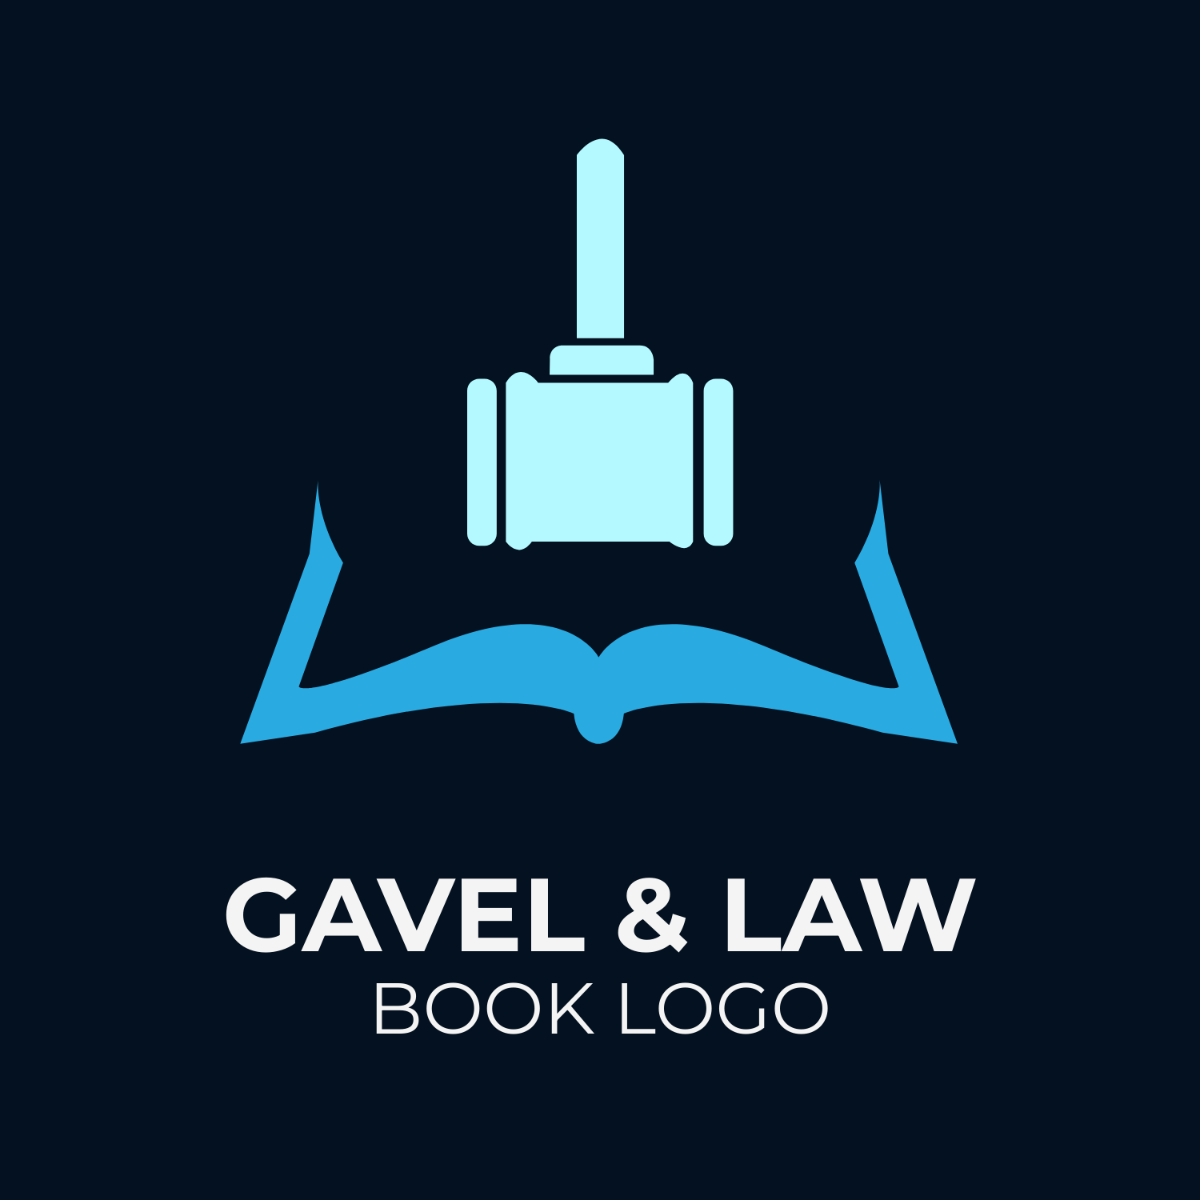 Gavel and Law Book Logo